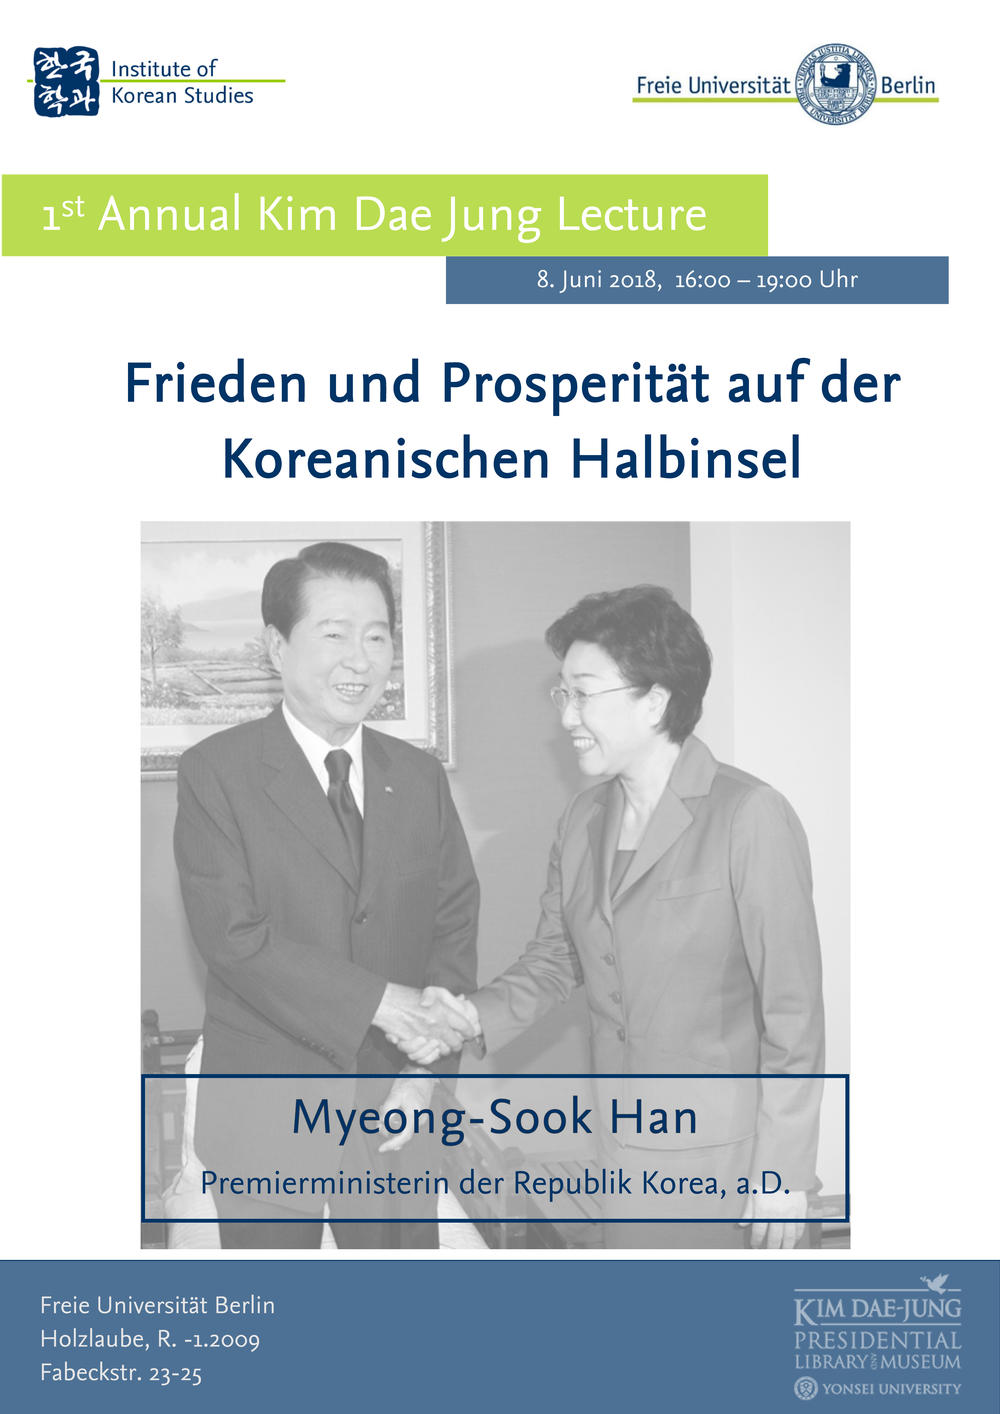 1st Kim Dae Jung Lecture